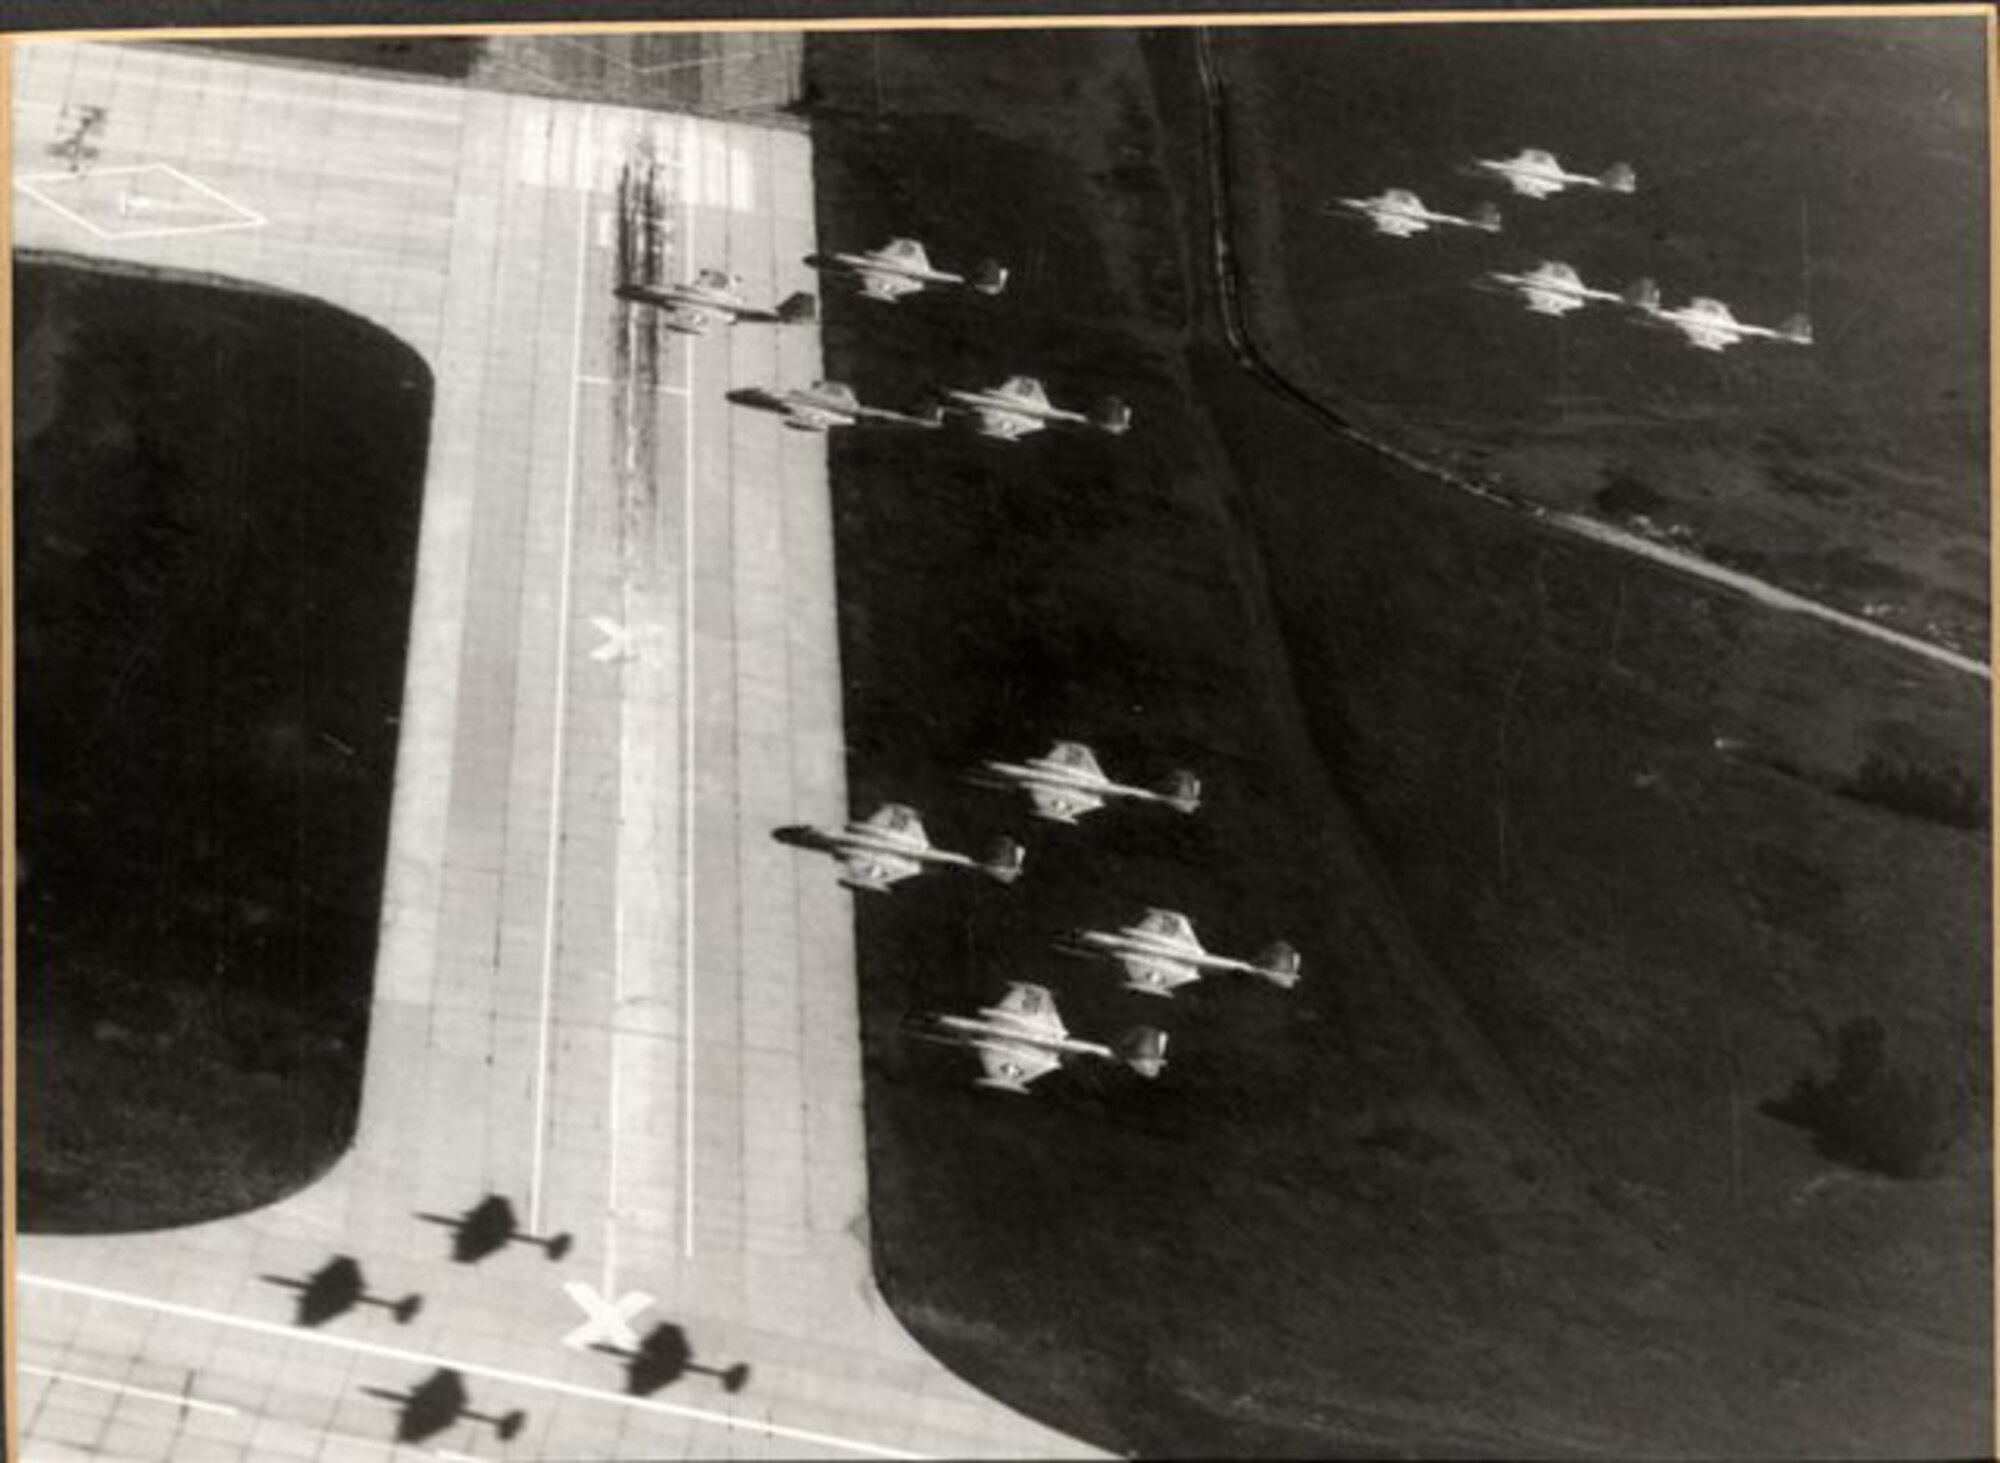 Twelve RB-57's from the 190th Tactical Reconnaissance Group fly over the end of the runway at Forbes Air Force Base on Friday, August 11, 1967. The V formation shown in the picture forms a traditional salute to the new home of the 190th.